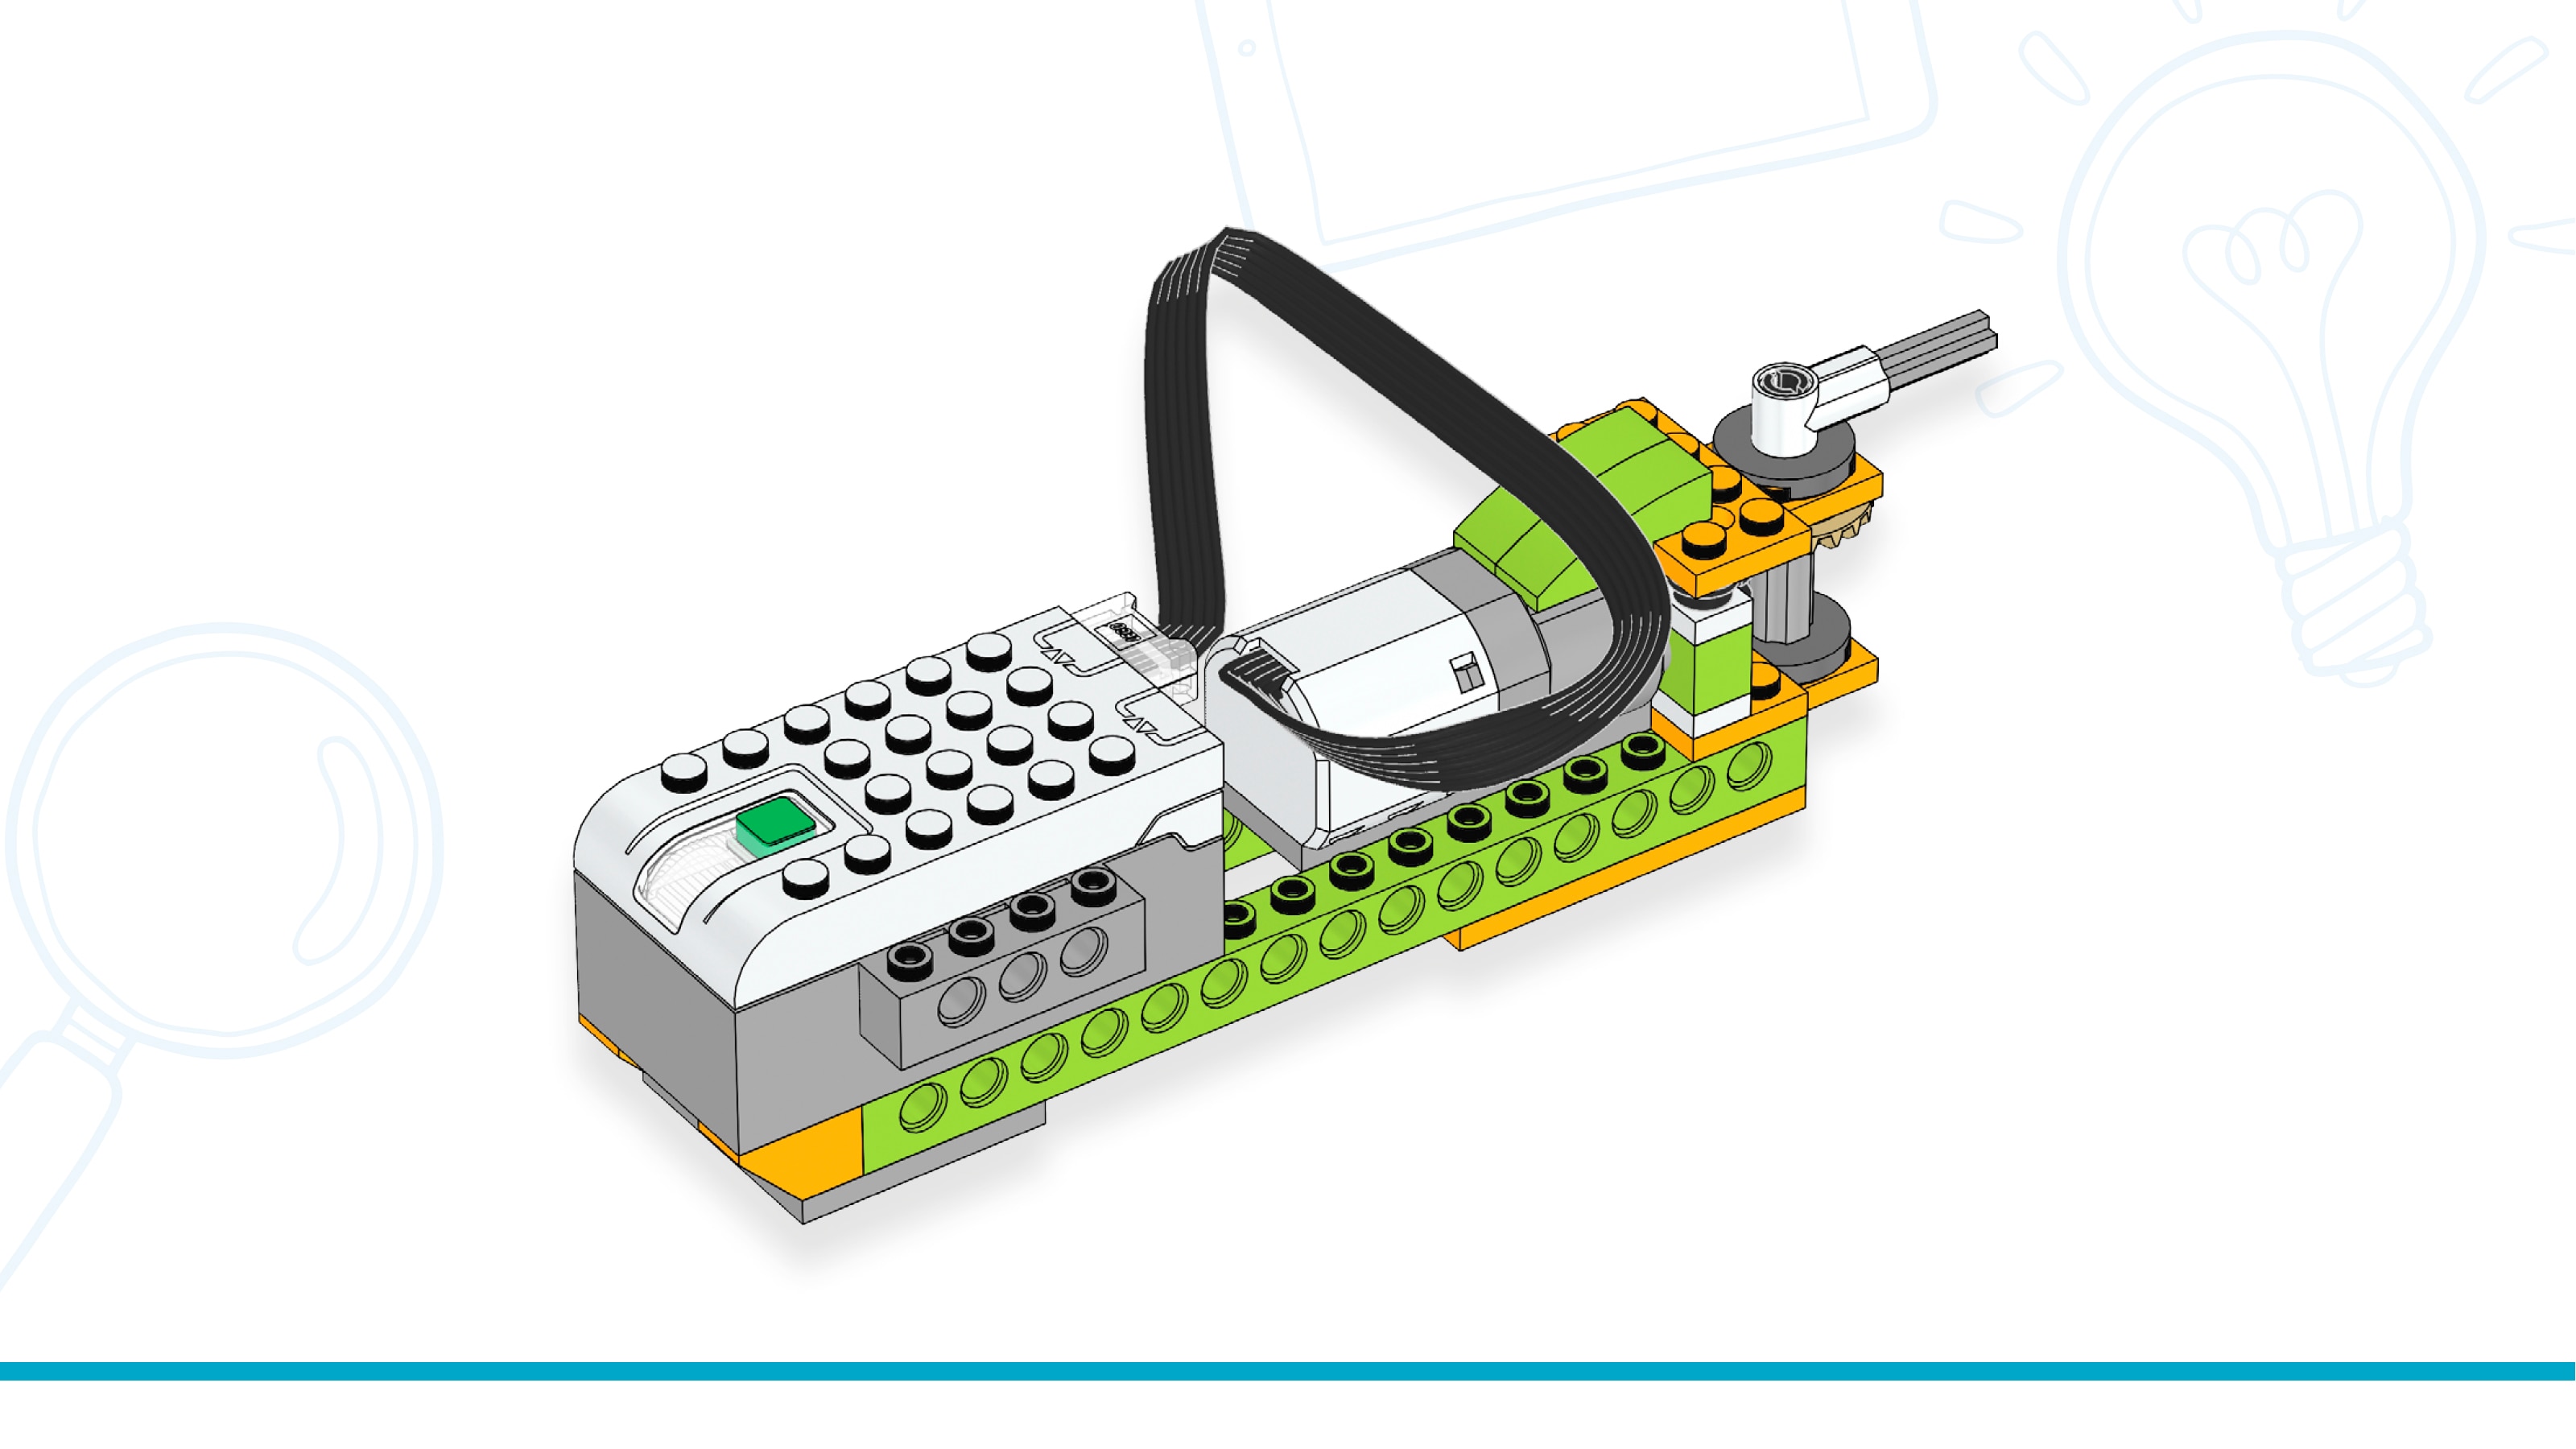 lego wedo 1.0 building instructions download install